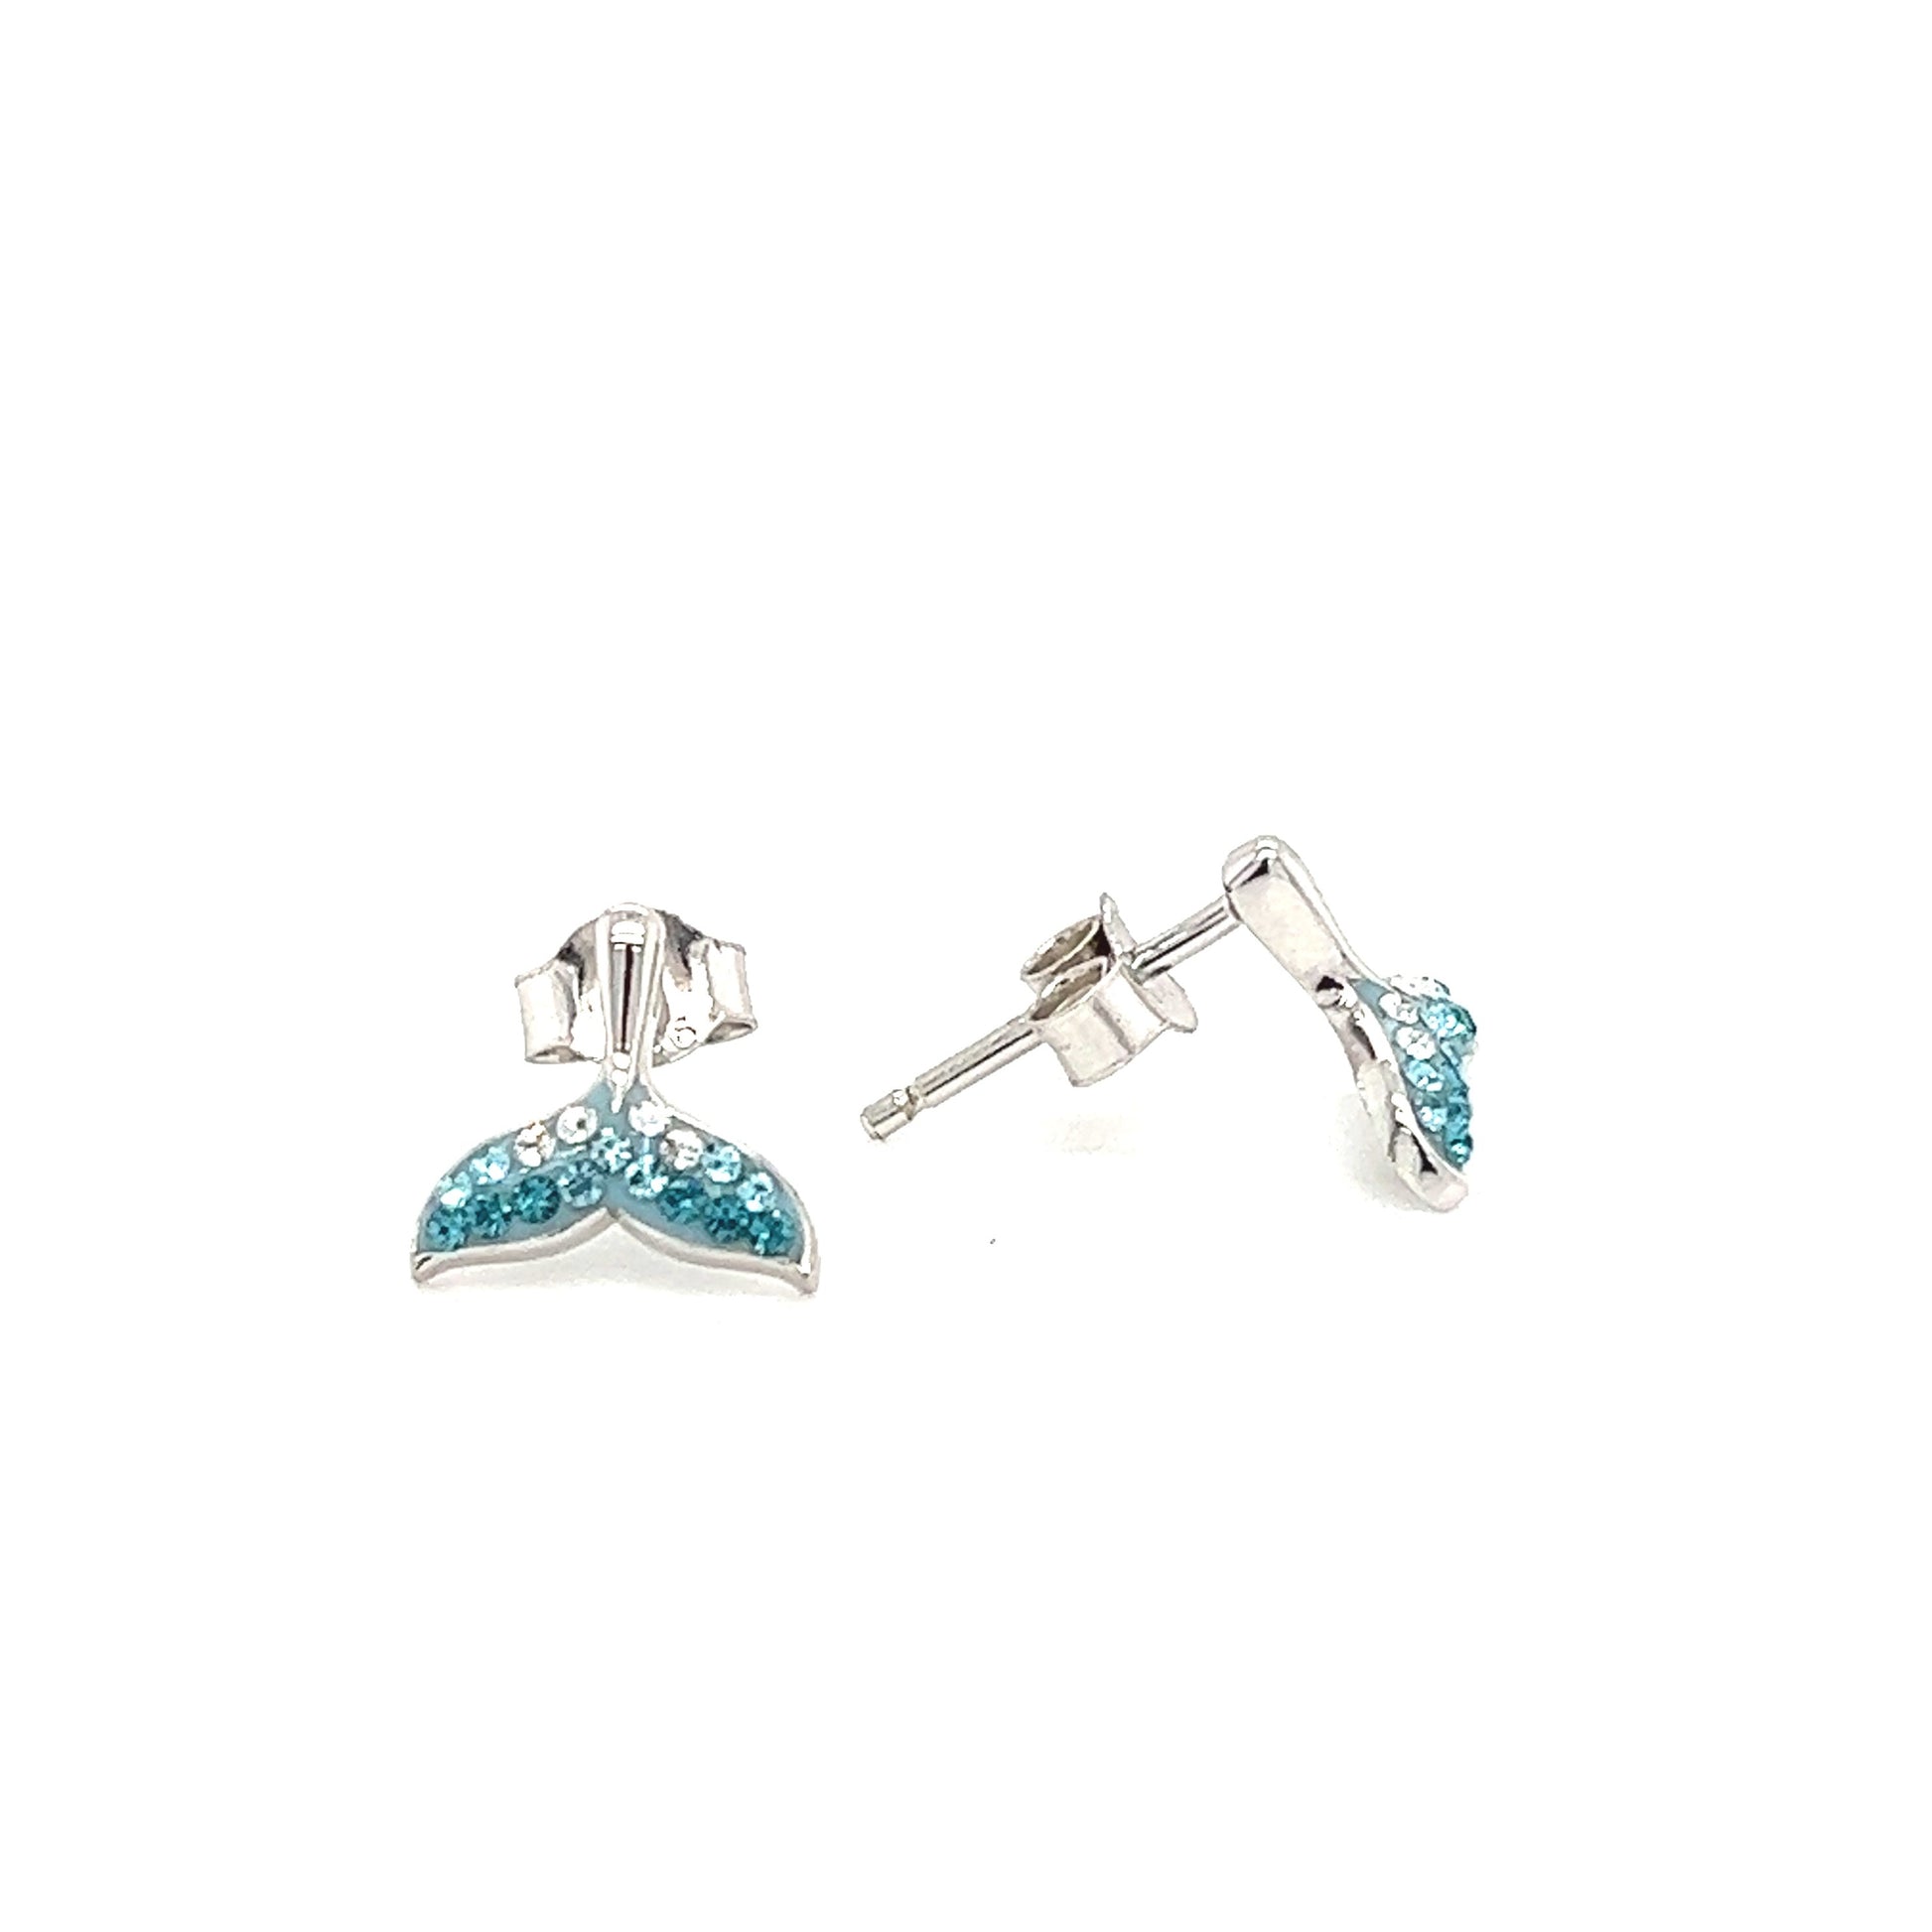 Whale Tail Stud Earrings with Turquoise Crystals in Sterling Silver. Front and Side View